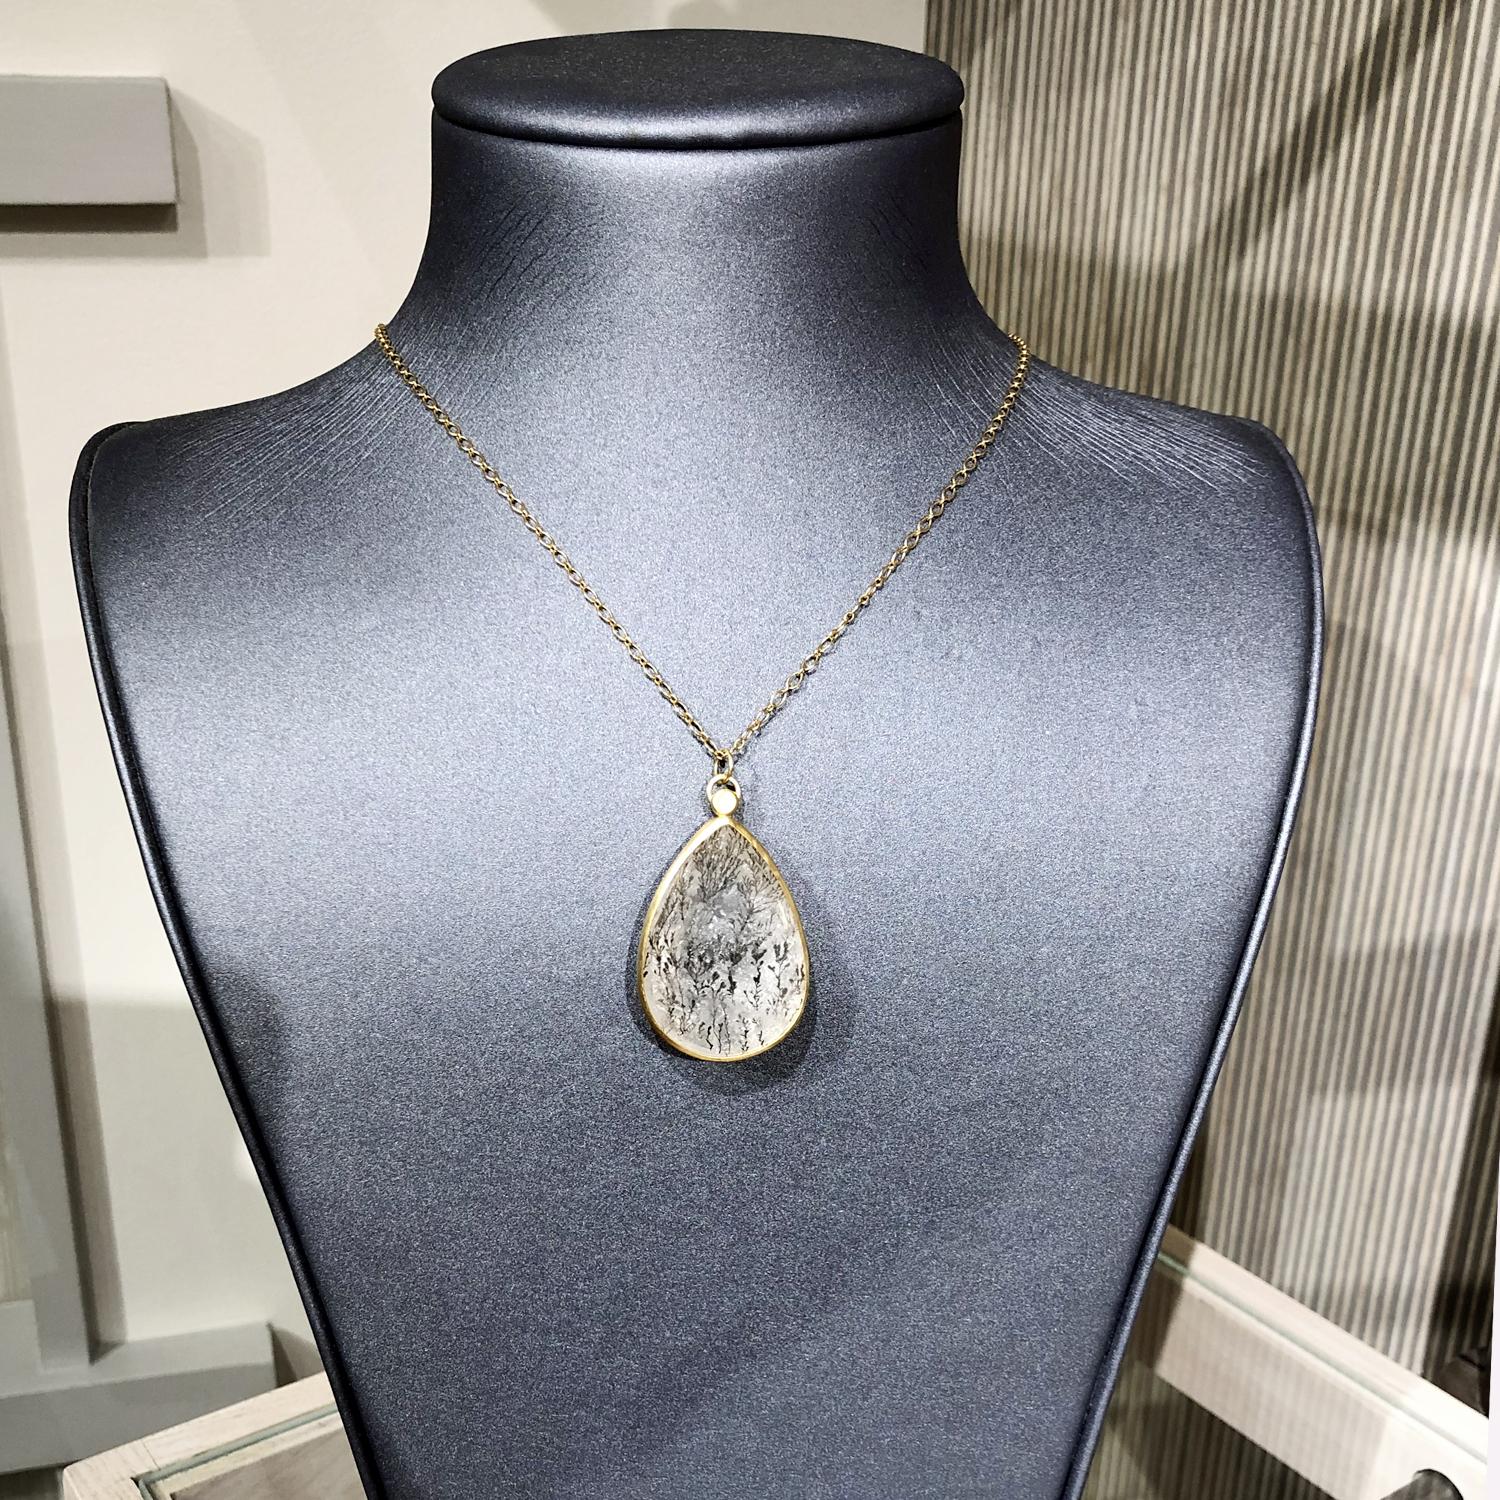 One of a Kind Drop Necklace handcrafted in matte-finished 18k yellow gold by jewelry designer Monica Marcella showcasing a stunning pear-shaped dendritic quartz uniquely faceted on both the front and back to wear two ways,  and attached to an 18